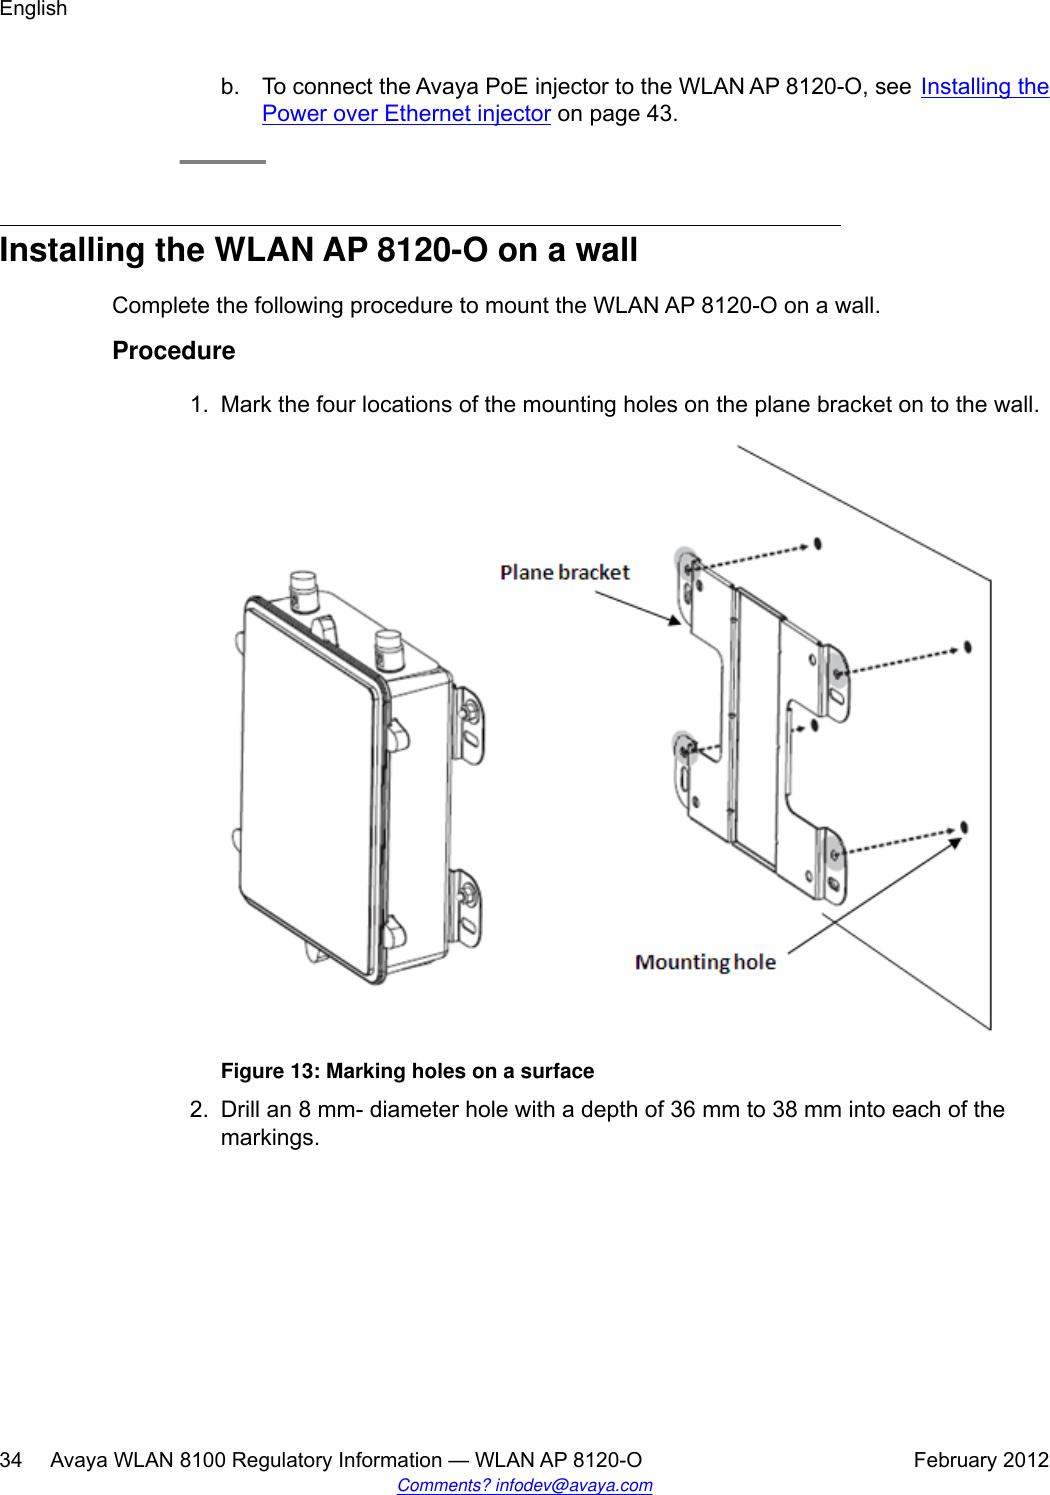 b. To connect the Avaya PoE injector to the WLAN AP 8120-O, see Installing thePower over Ethernet injector on page 43.Installing the WLAN AP 8120-O on a wallComplete the following procedure to mount the WLAN AP 8120-O on a wall.Procedure1. Mark the four locations of the mounting holes on the plane bracket on to the wall.Figure 13: Marking holes on a surface2. Drill an 8 mm- diameter hole with a depth of 36 mm to 38 mm into each of themarkings.English34     Avaya WLAN 8100 Regulatory Information — WLAN AP 8120-O February 2012Comments? infodev@avaya.com